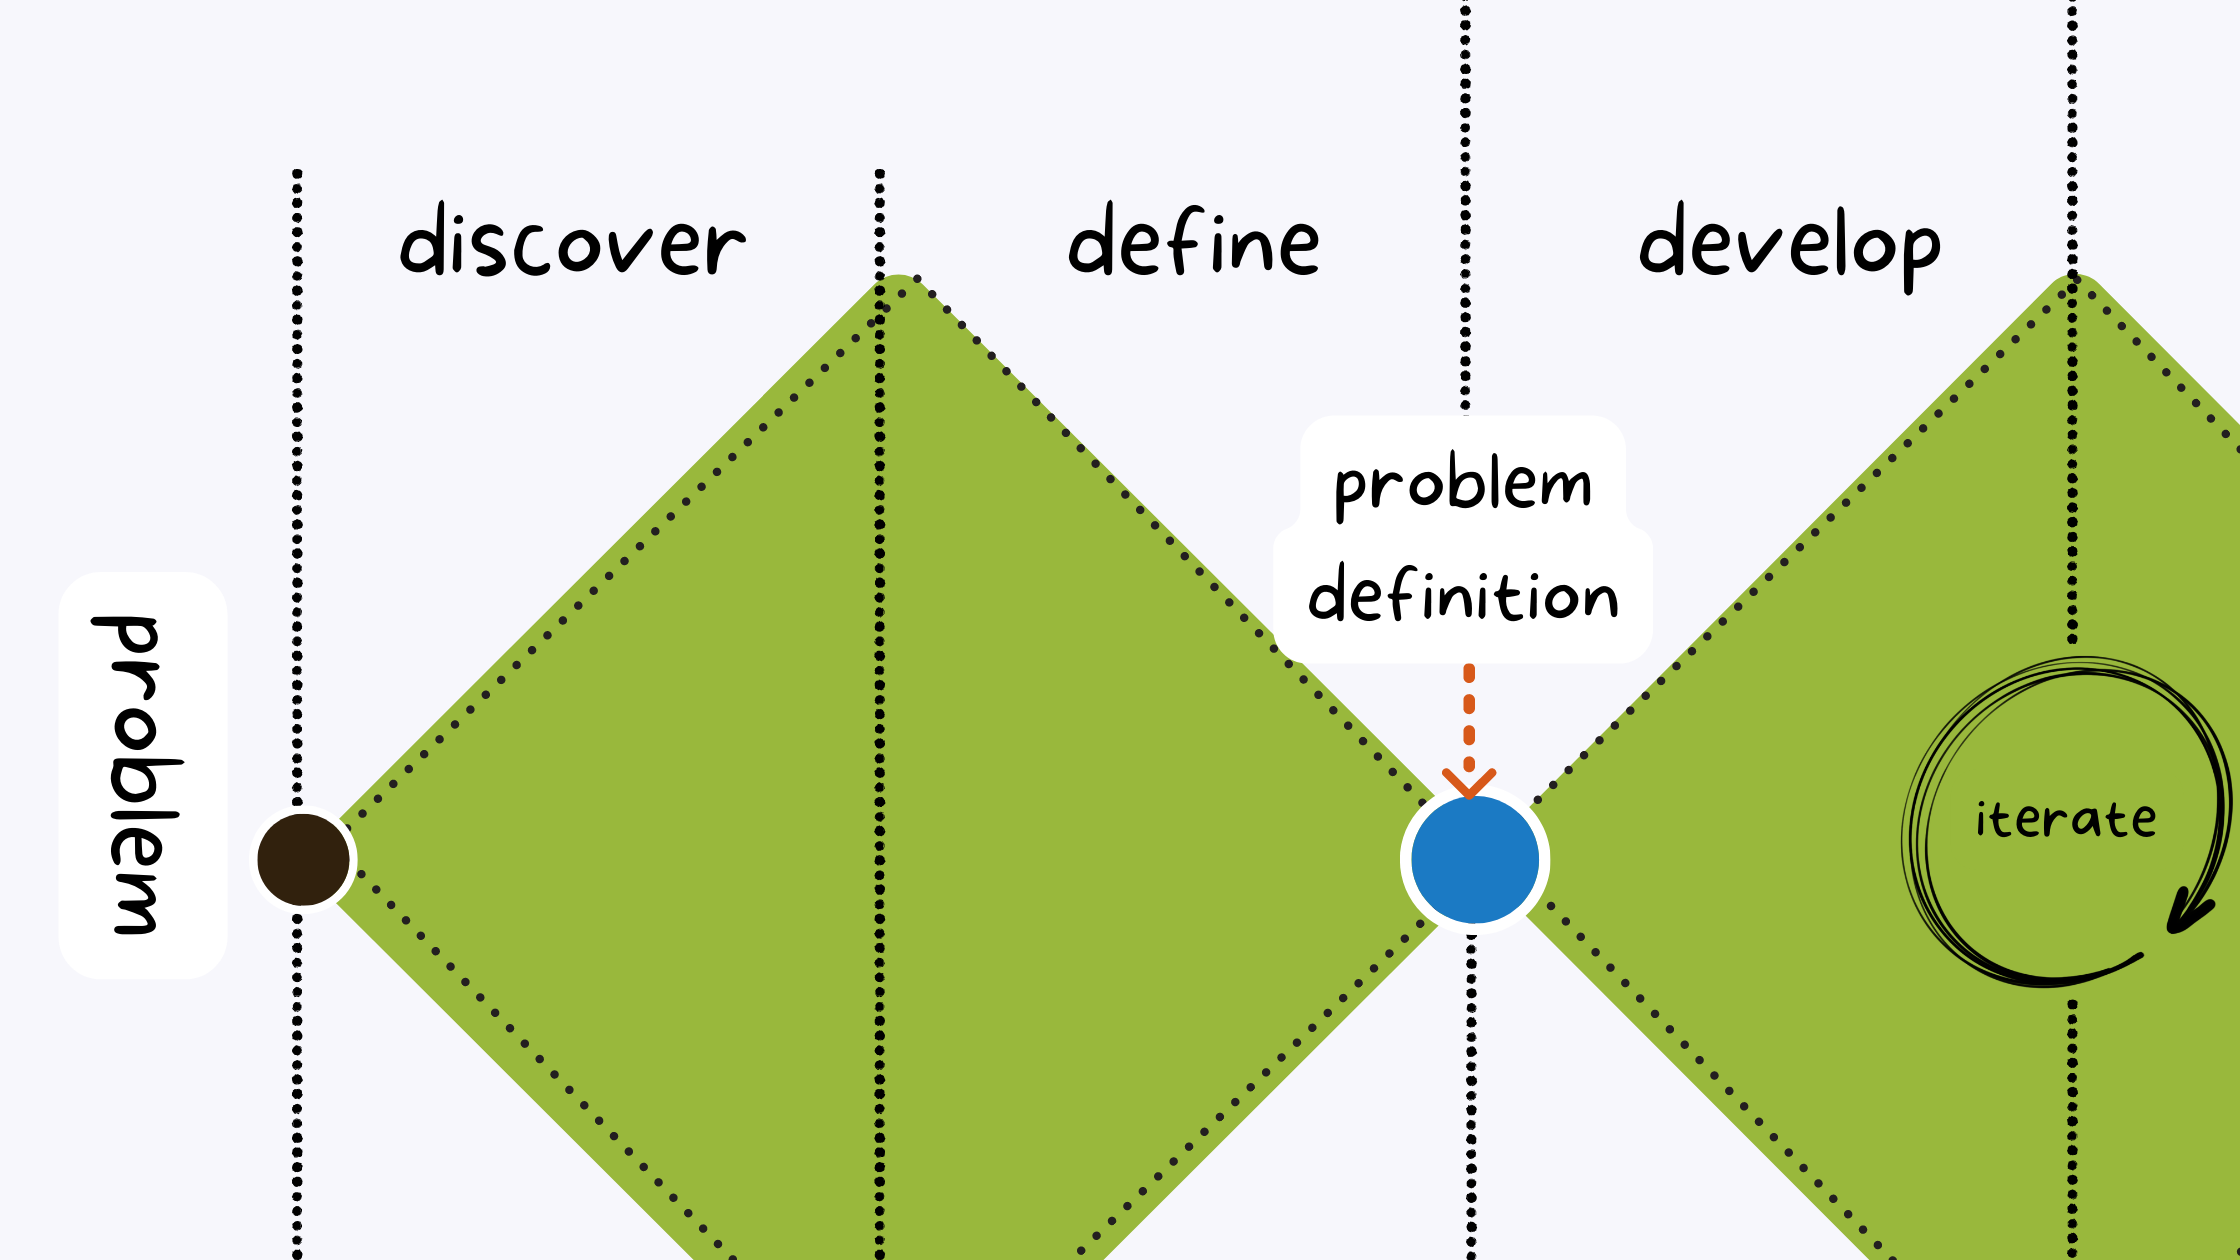 zoomed in, cropped portion of the double diamond method diagram displaying only the left side of the process, focused on the Problem Statement to Definition part.